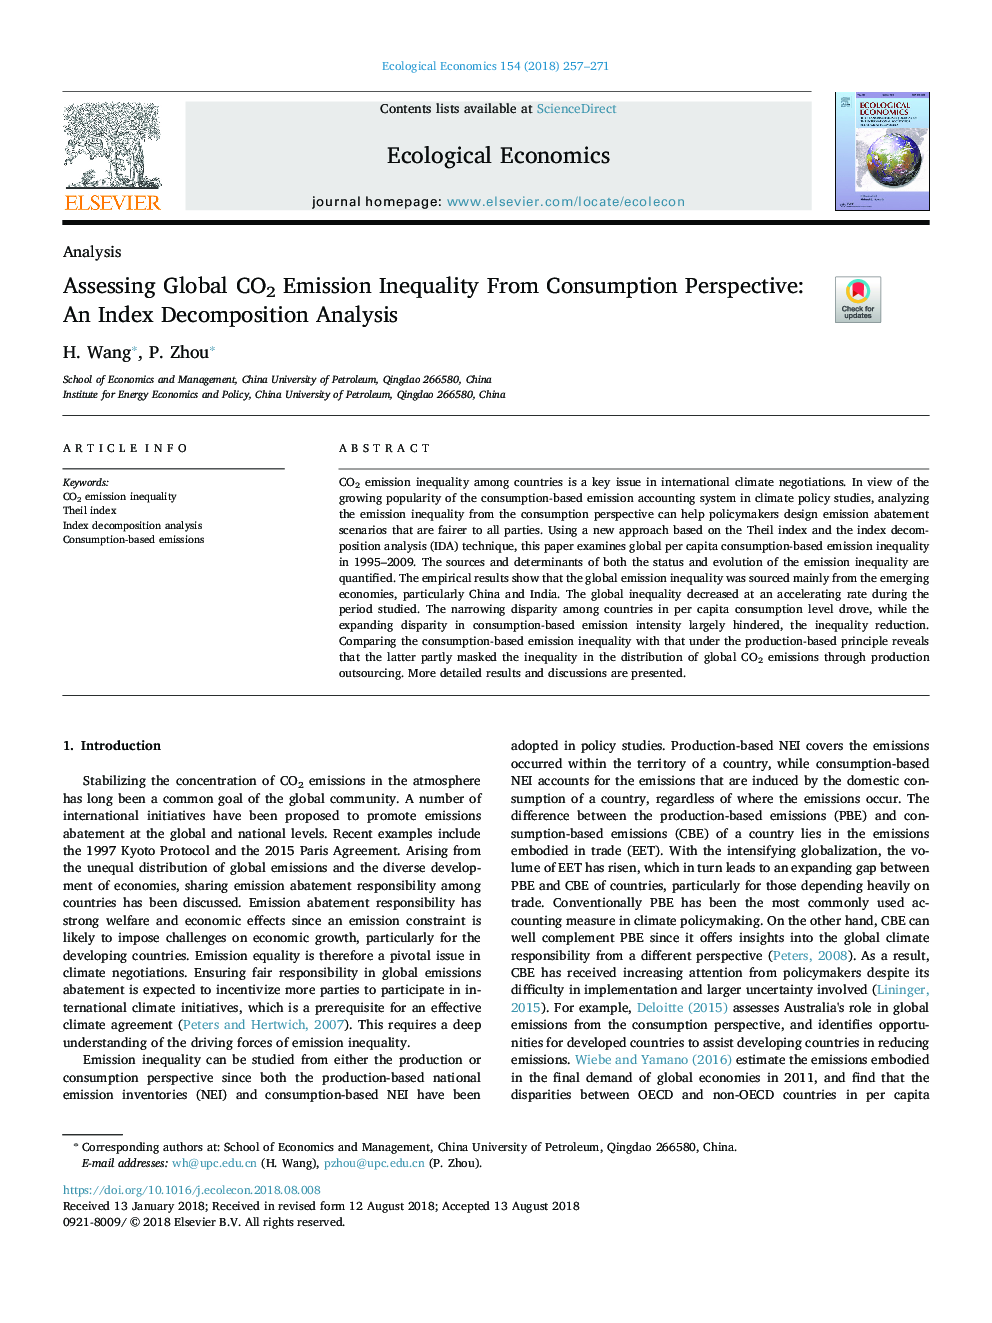 Assessing Global CO2 Emission Inequality From Consumption Perspective: An Index Decomposition Analysis